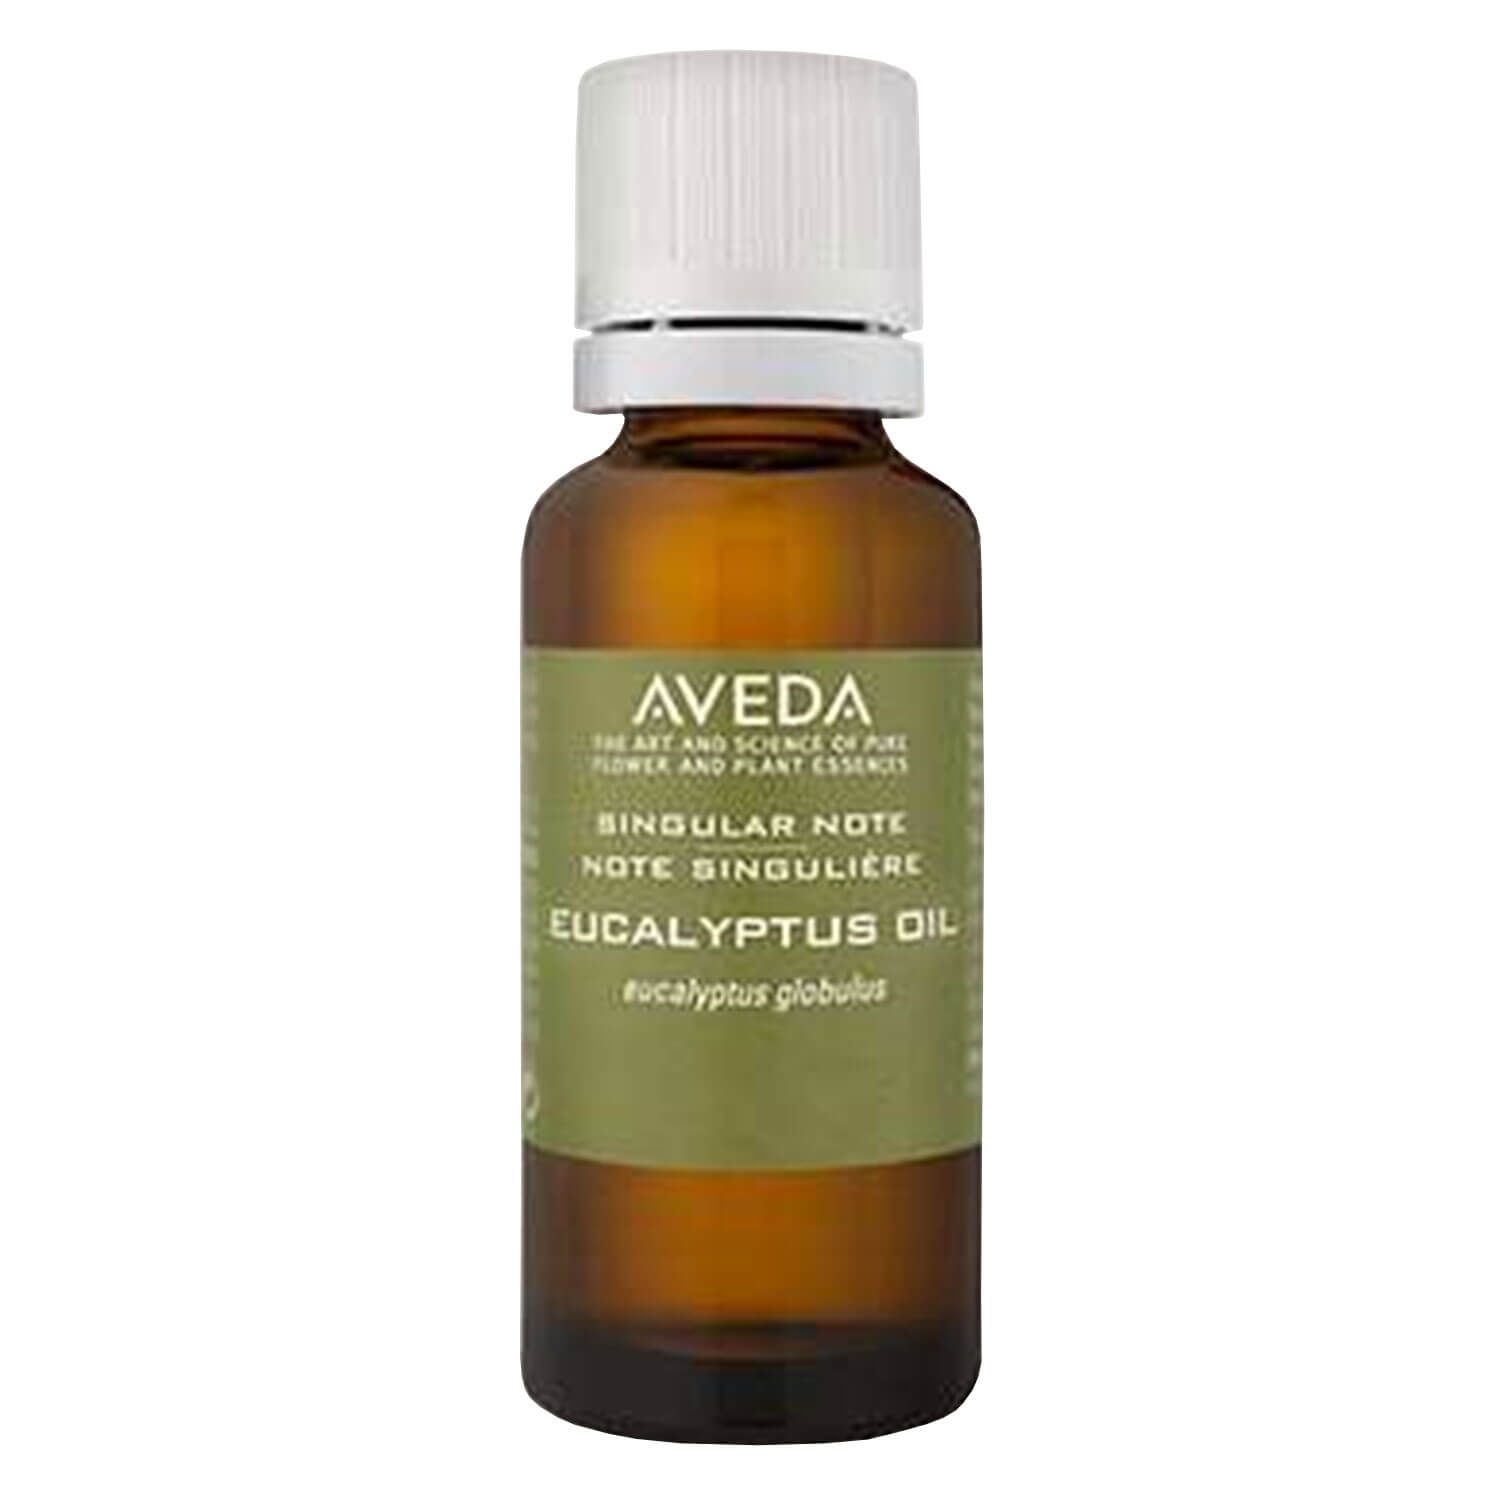 Product image from singular note - eucalyptus oil